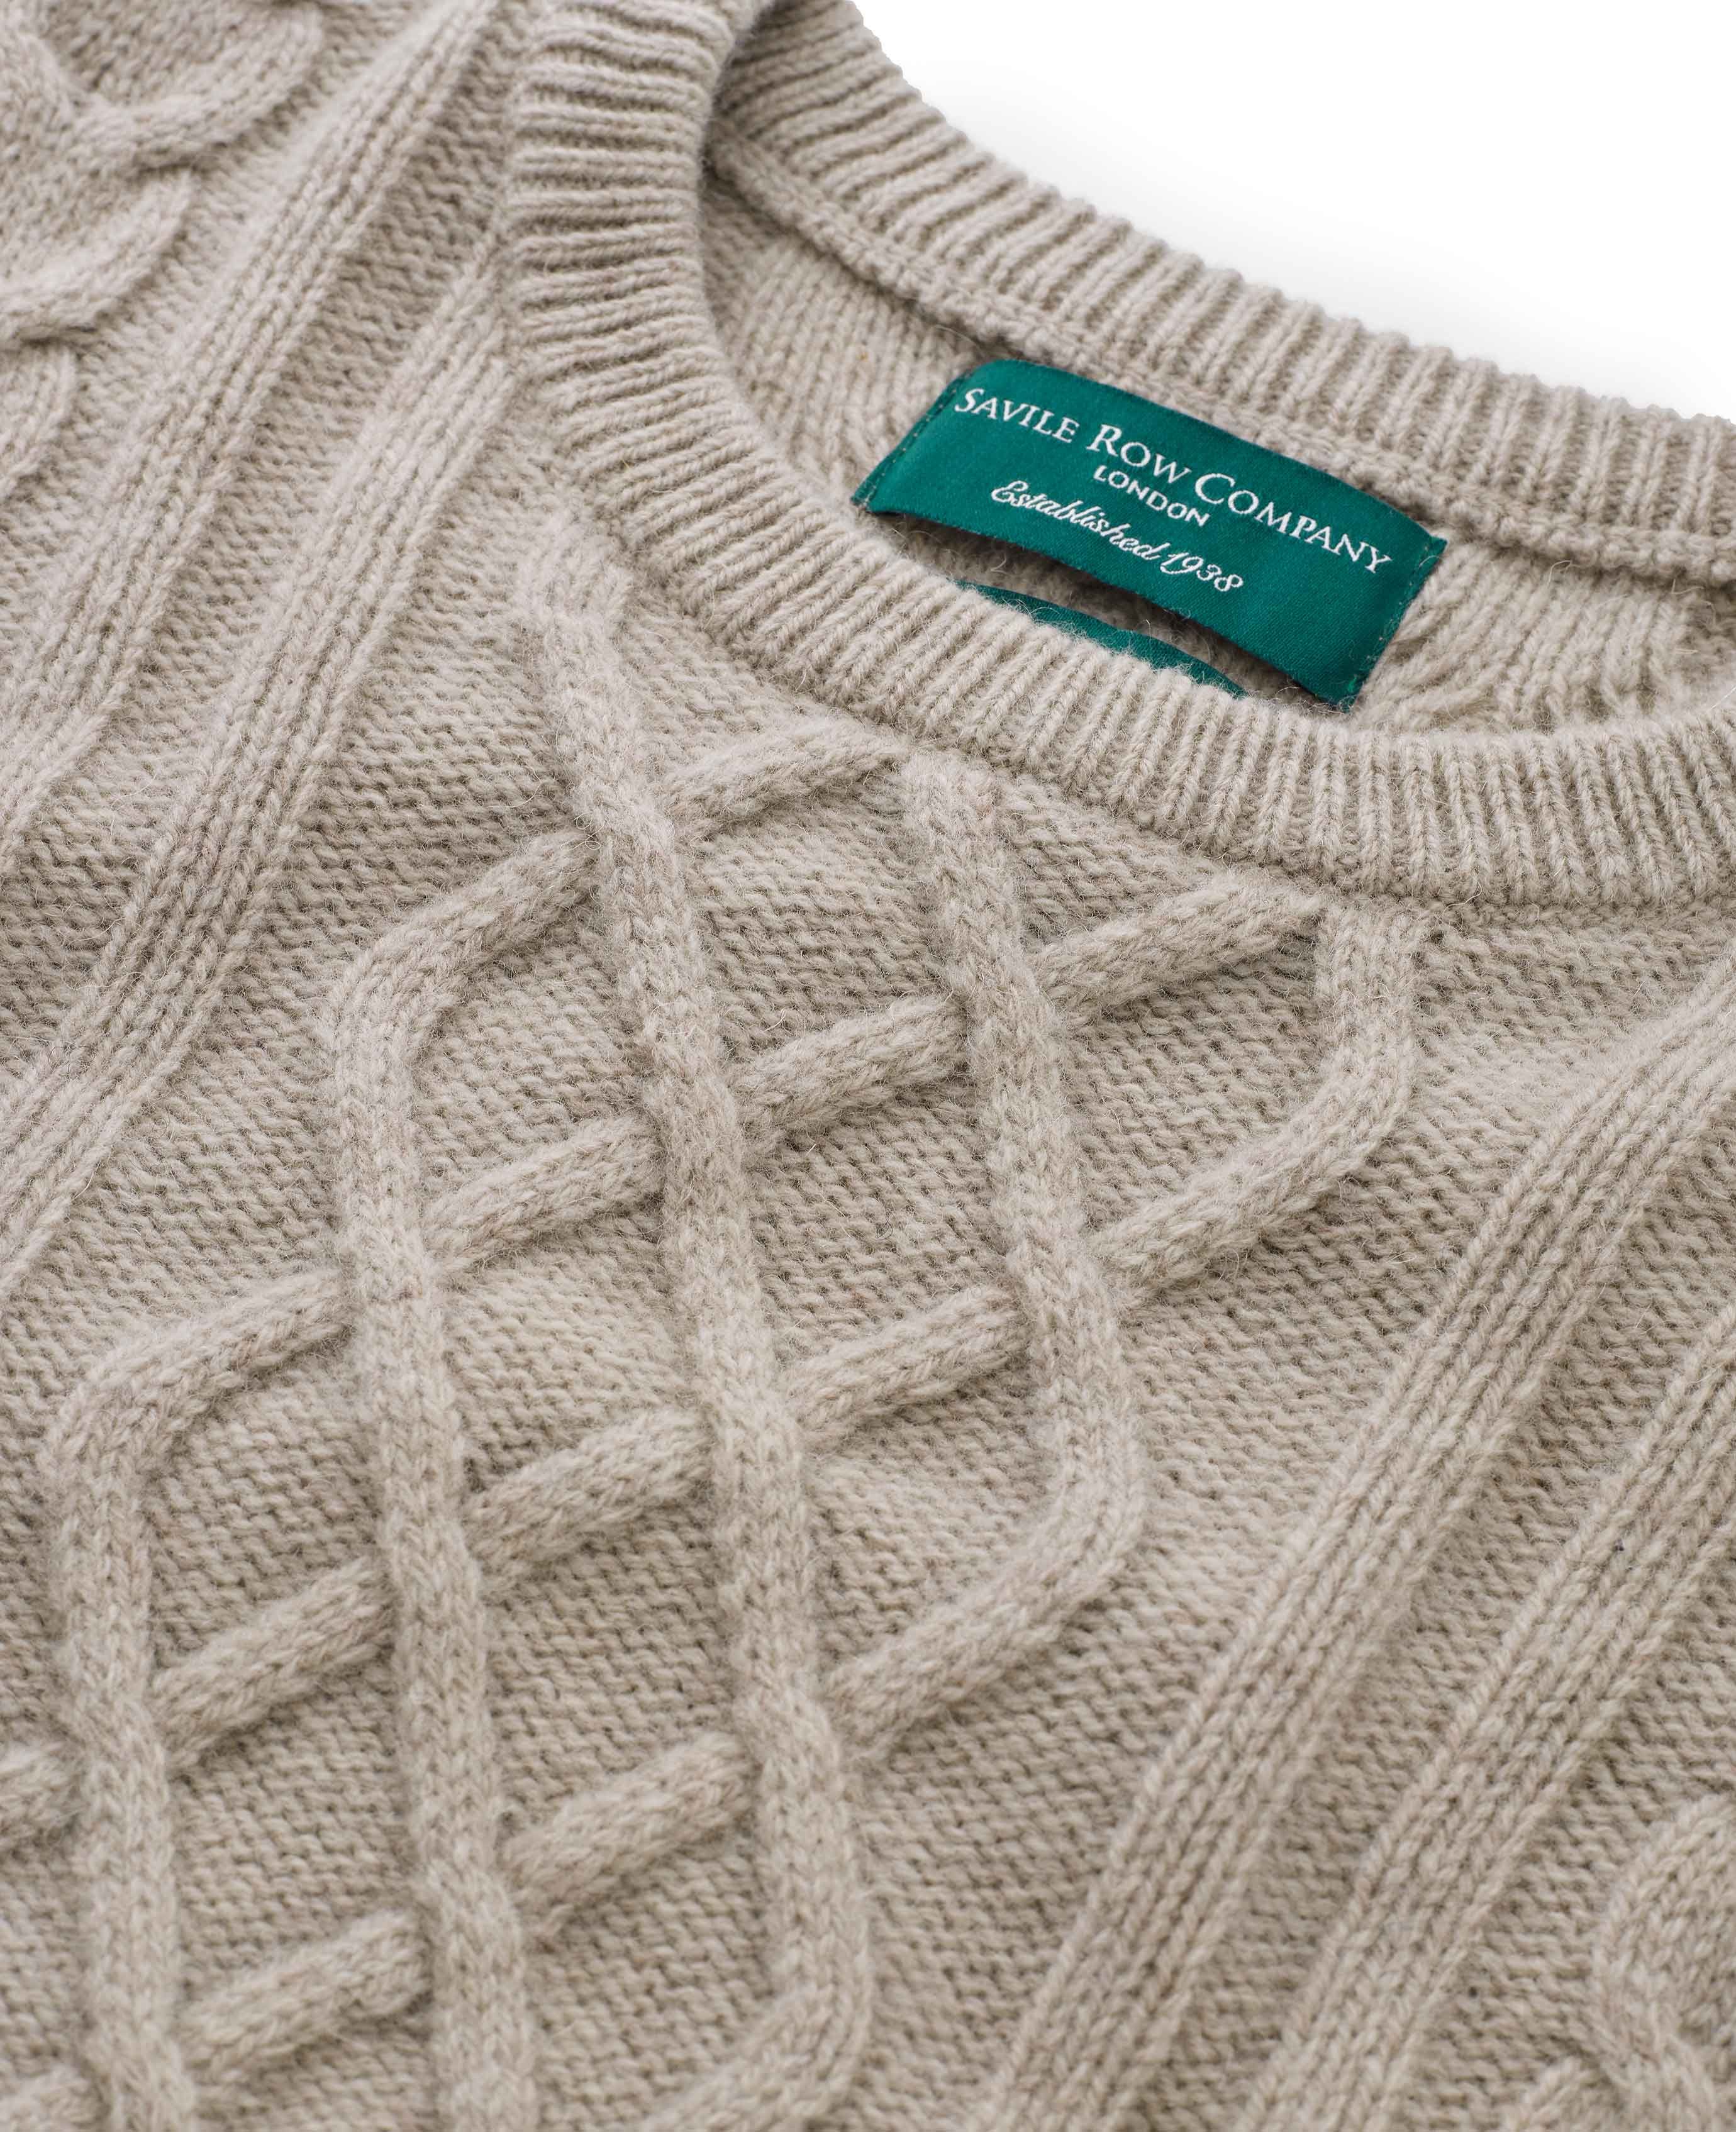 Men's Lambswool Blend Cable Knit Jumper in Oatmeal | Savile Row Co